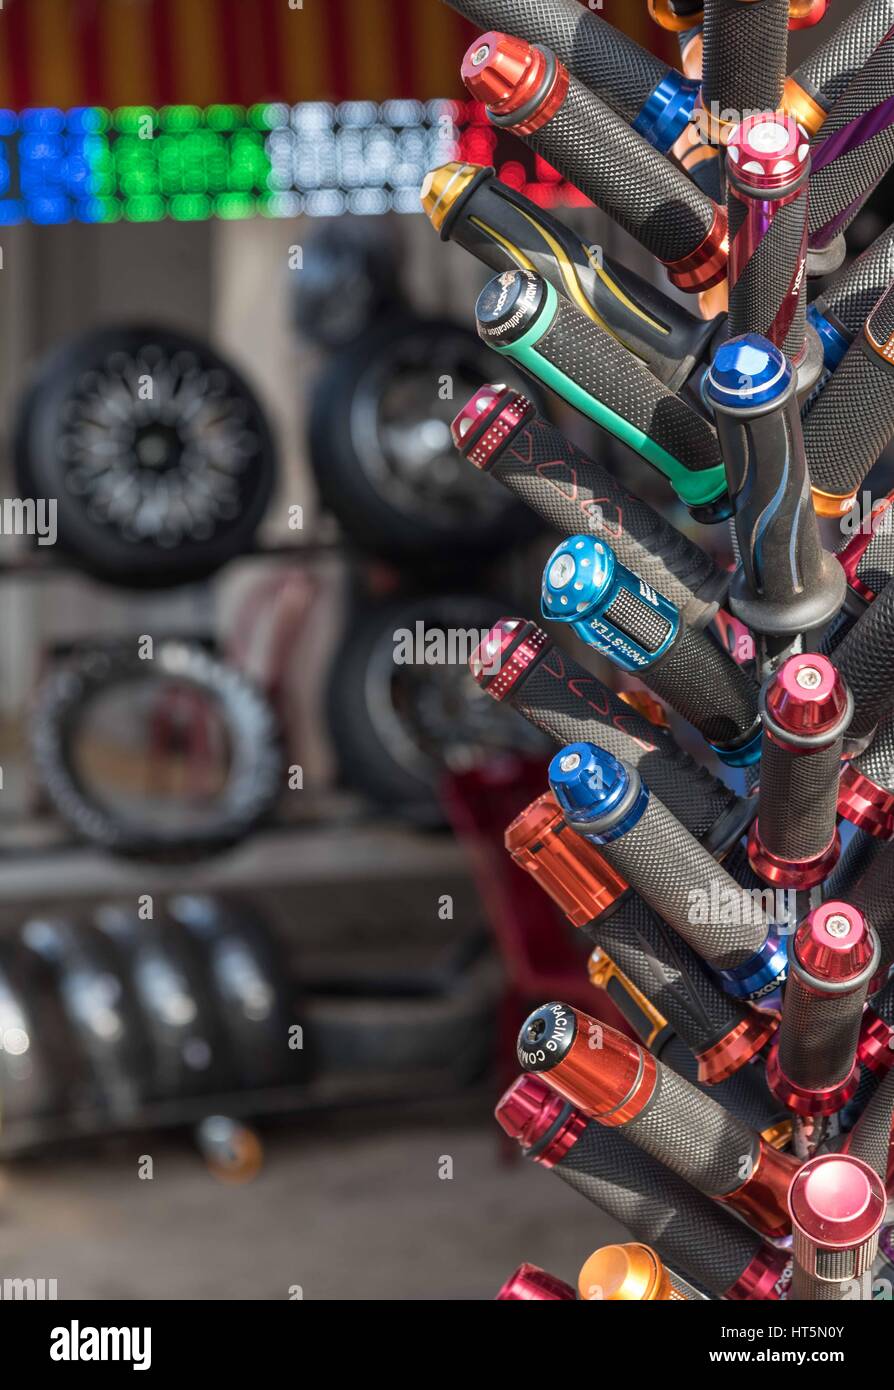 https://c8.alamy.com/comp/HT5N0Y/vibrant-motorbike-accessories-for-sale-at-a-roadside-shop-kampot-cambodia-HT5N0Y.jpg